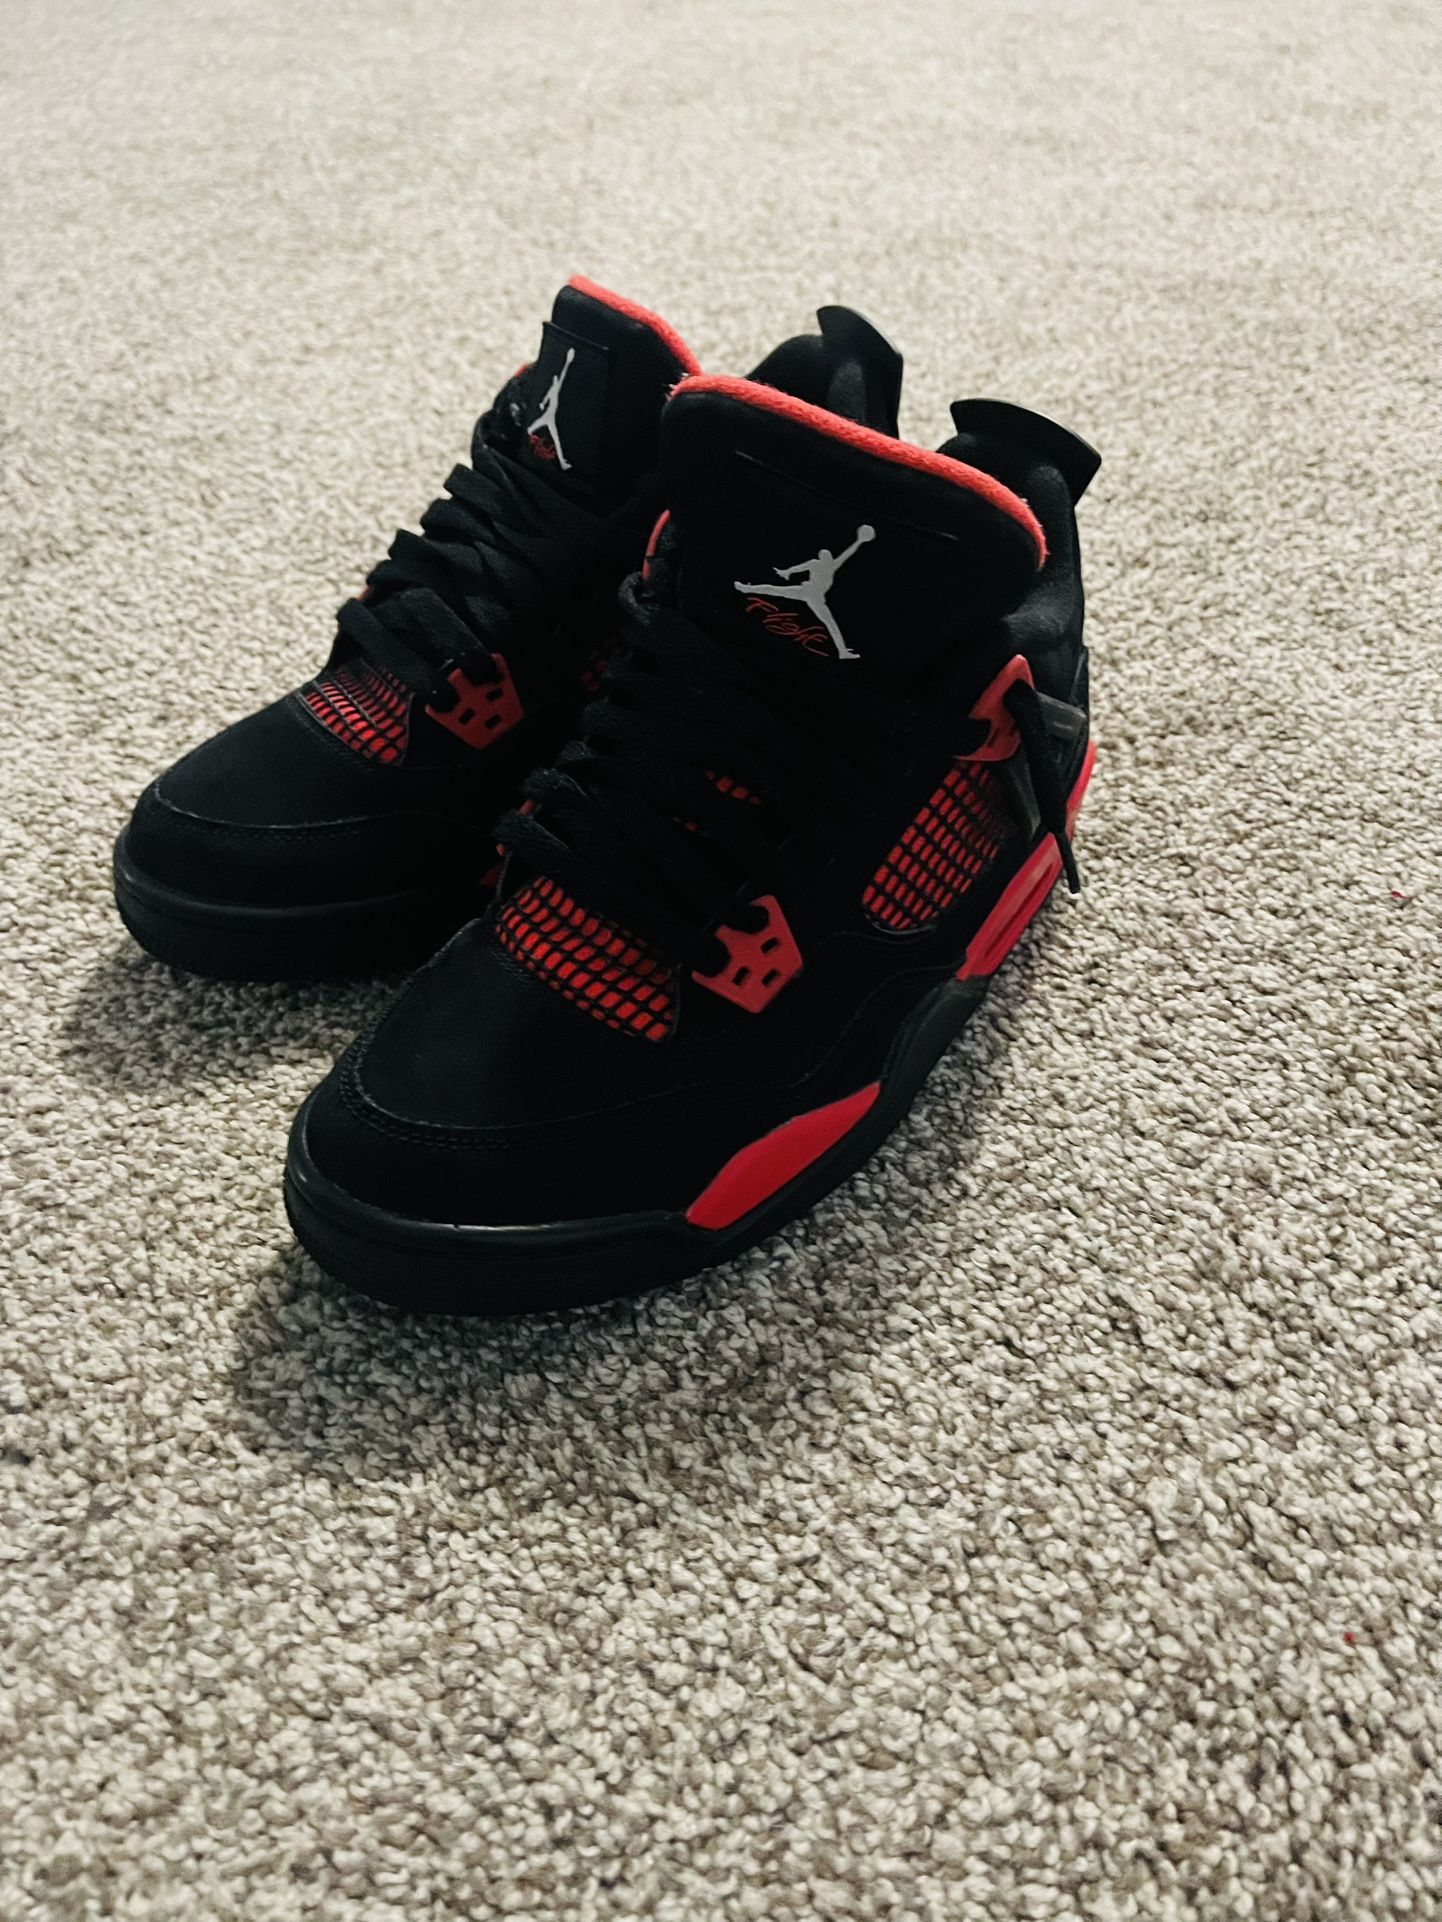 Used But Nearly New Red Thunders 4s 